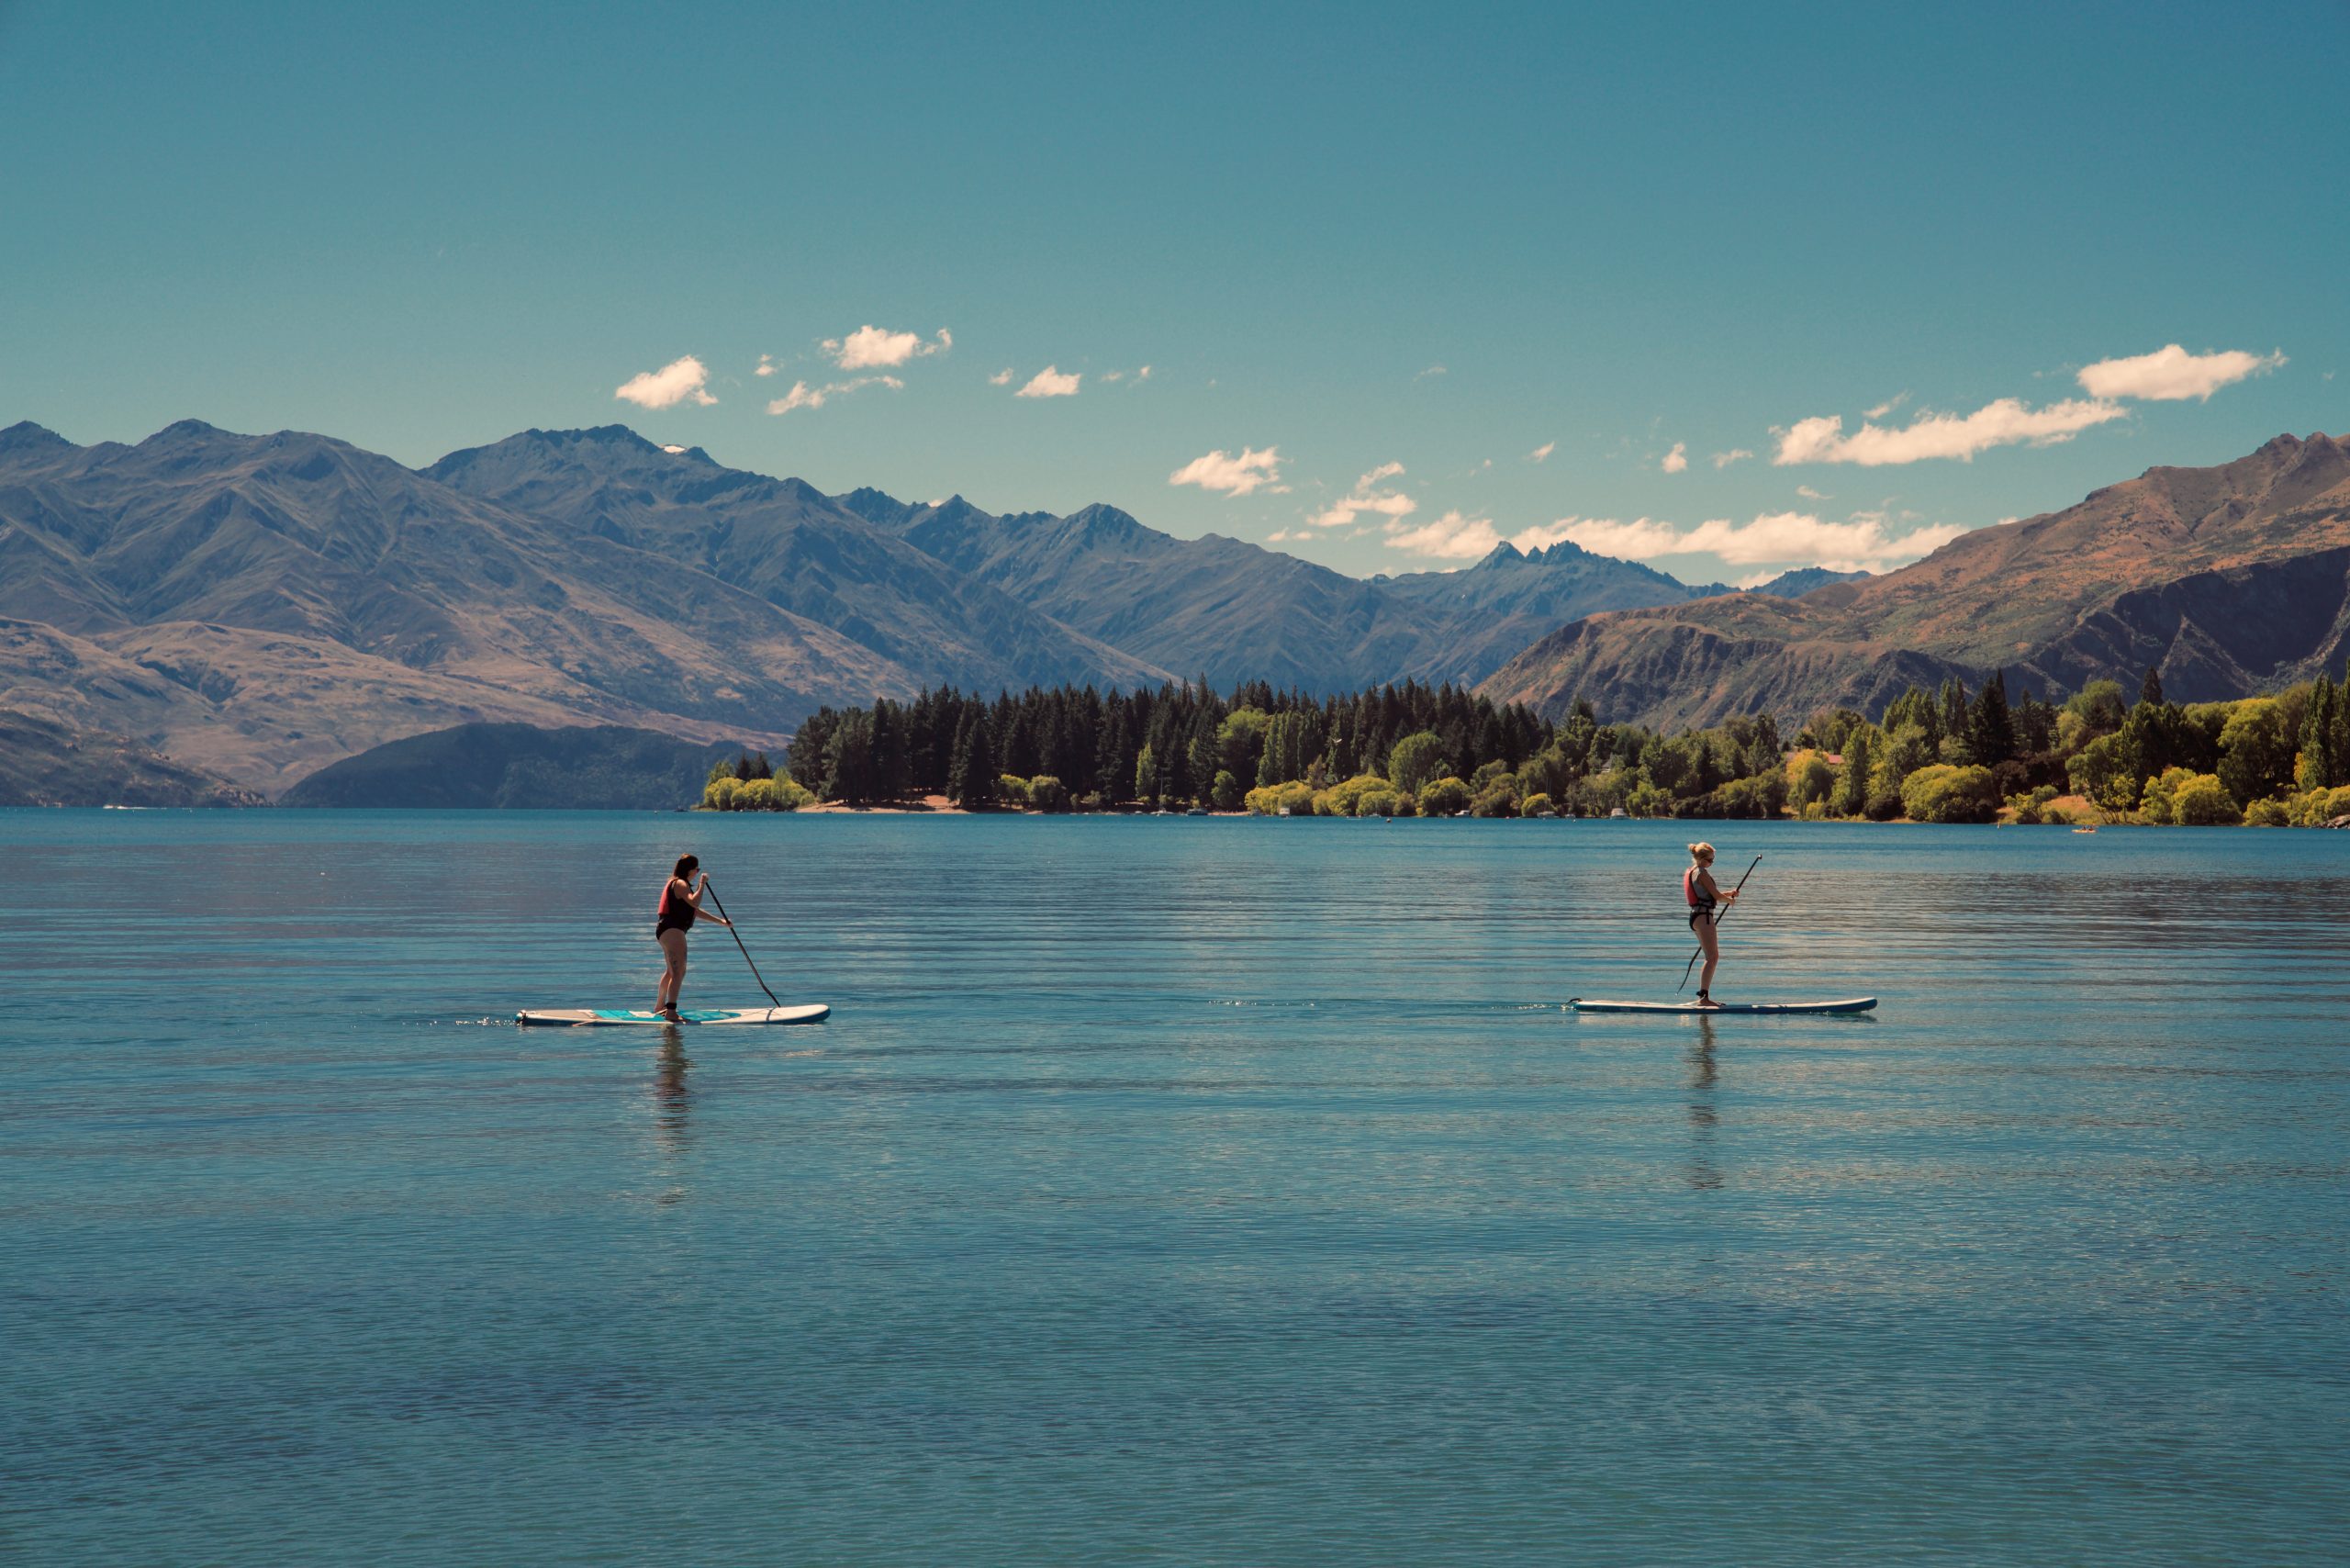 Essential Things You Need Before Going On A Paddle Boarding Trip